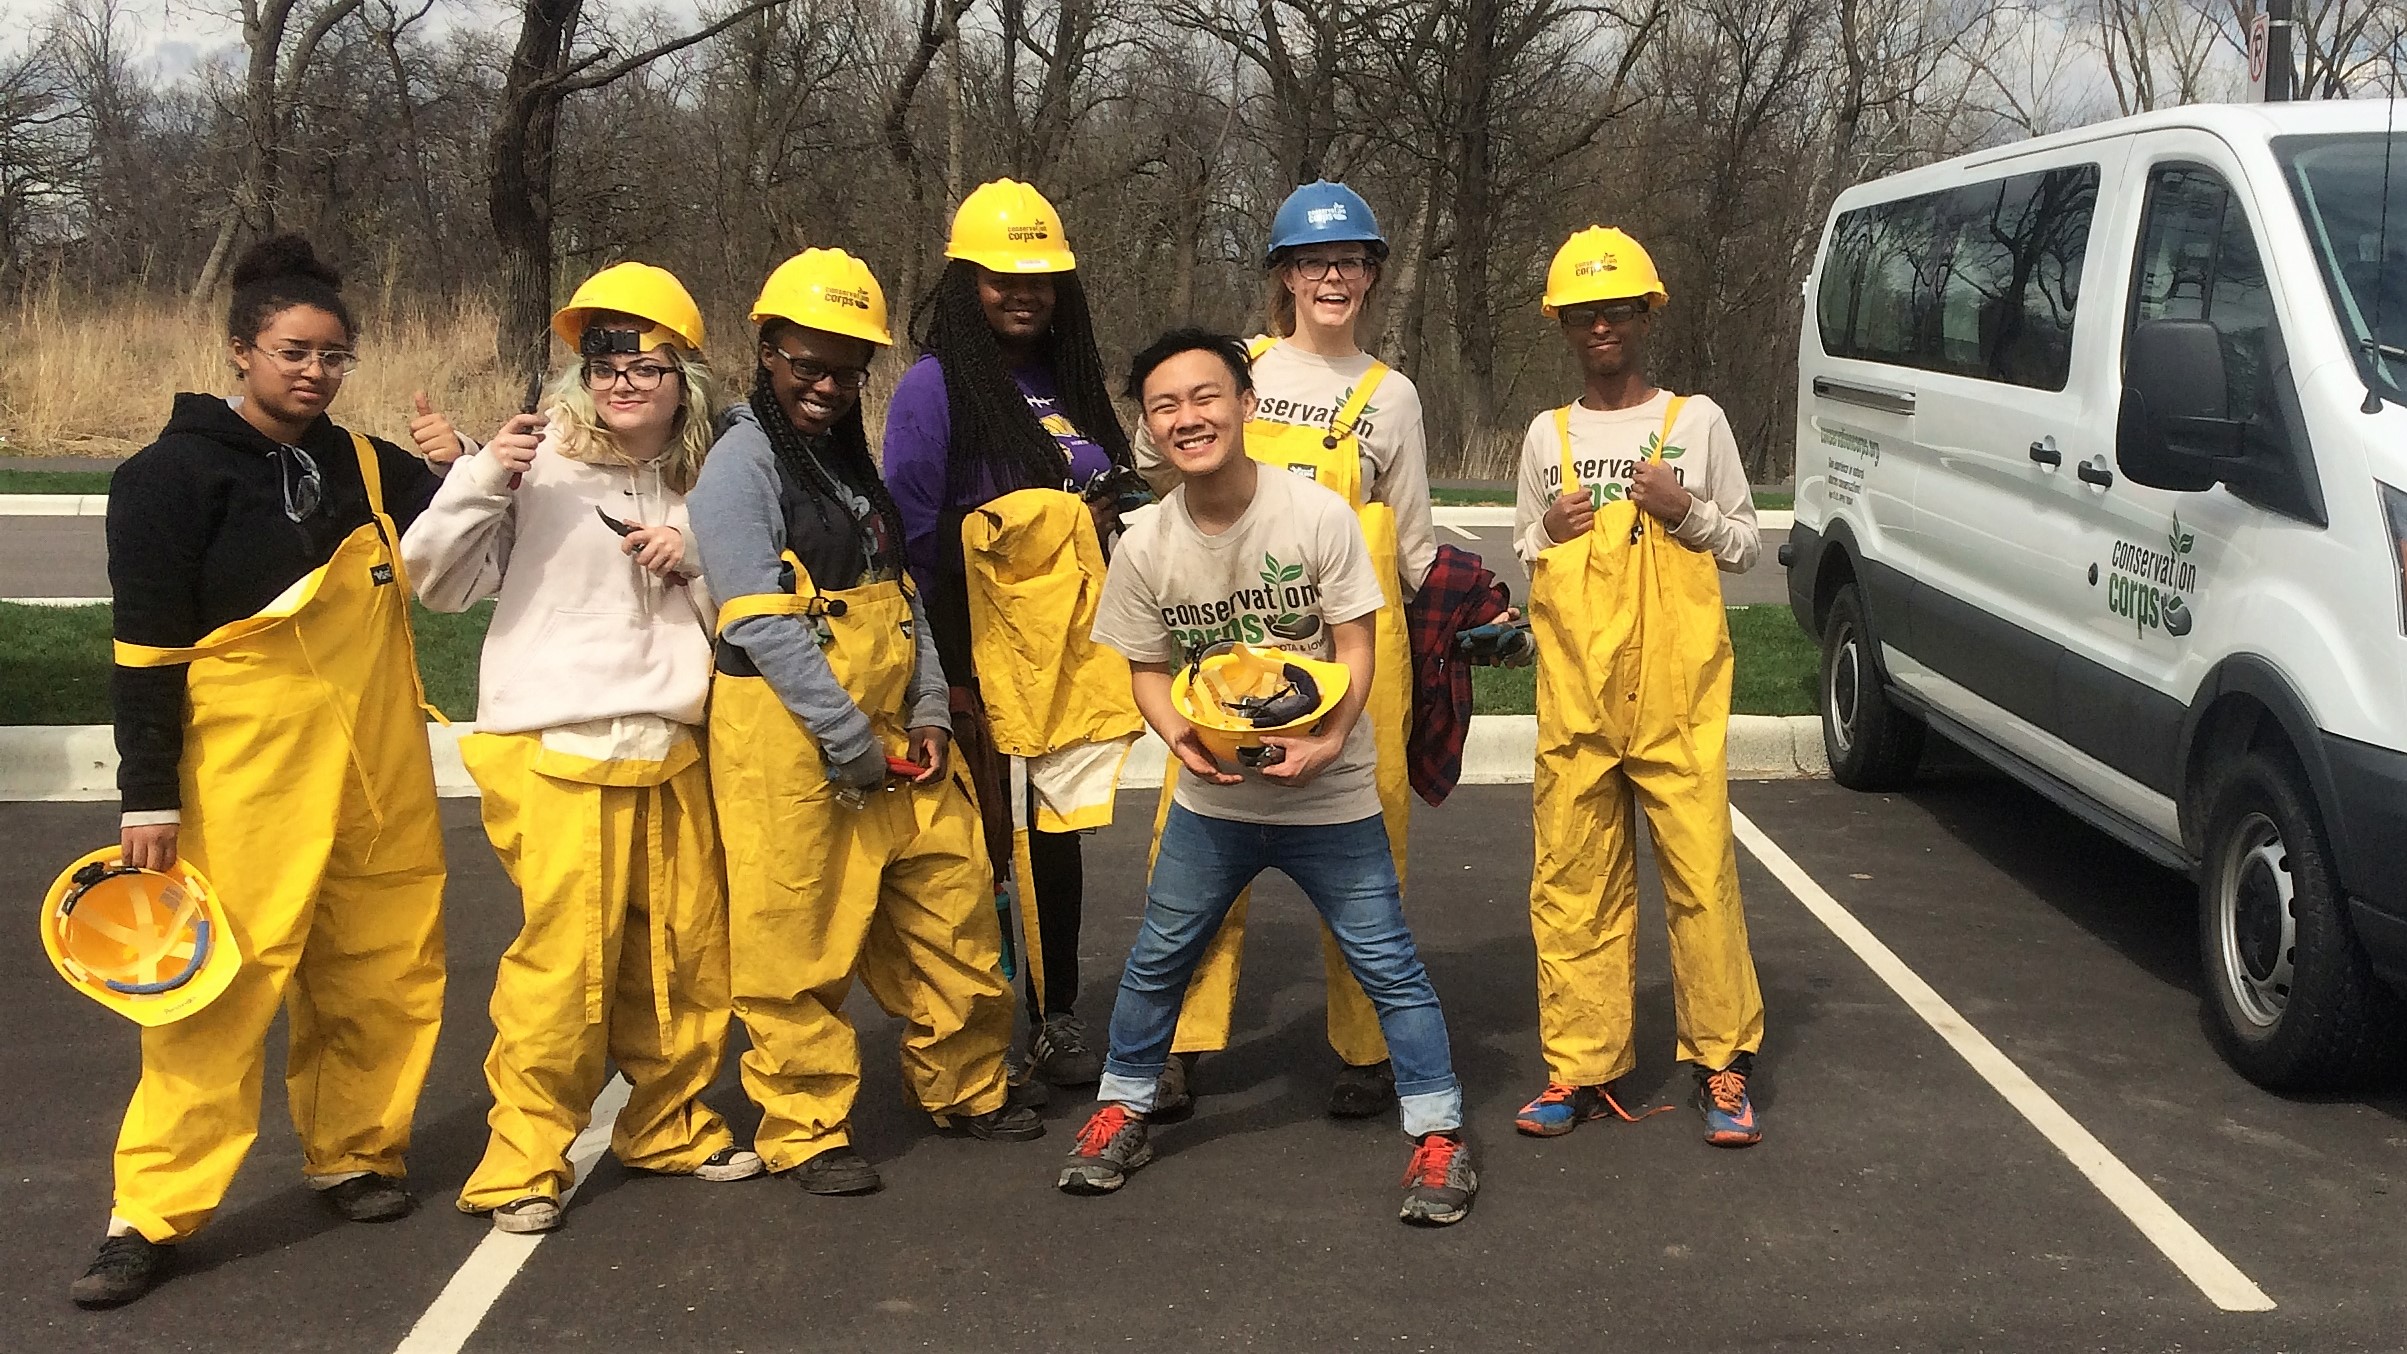 Pictured: The El Rio Youth Crew after a field day spent clipping Corydalis incisa      April 15, 2017 | Como Park, Saint Paul, MN